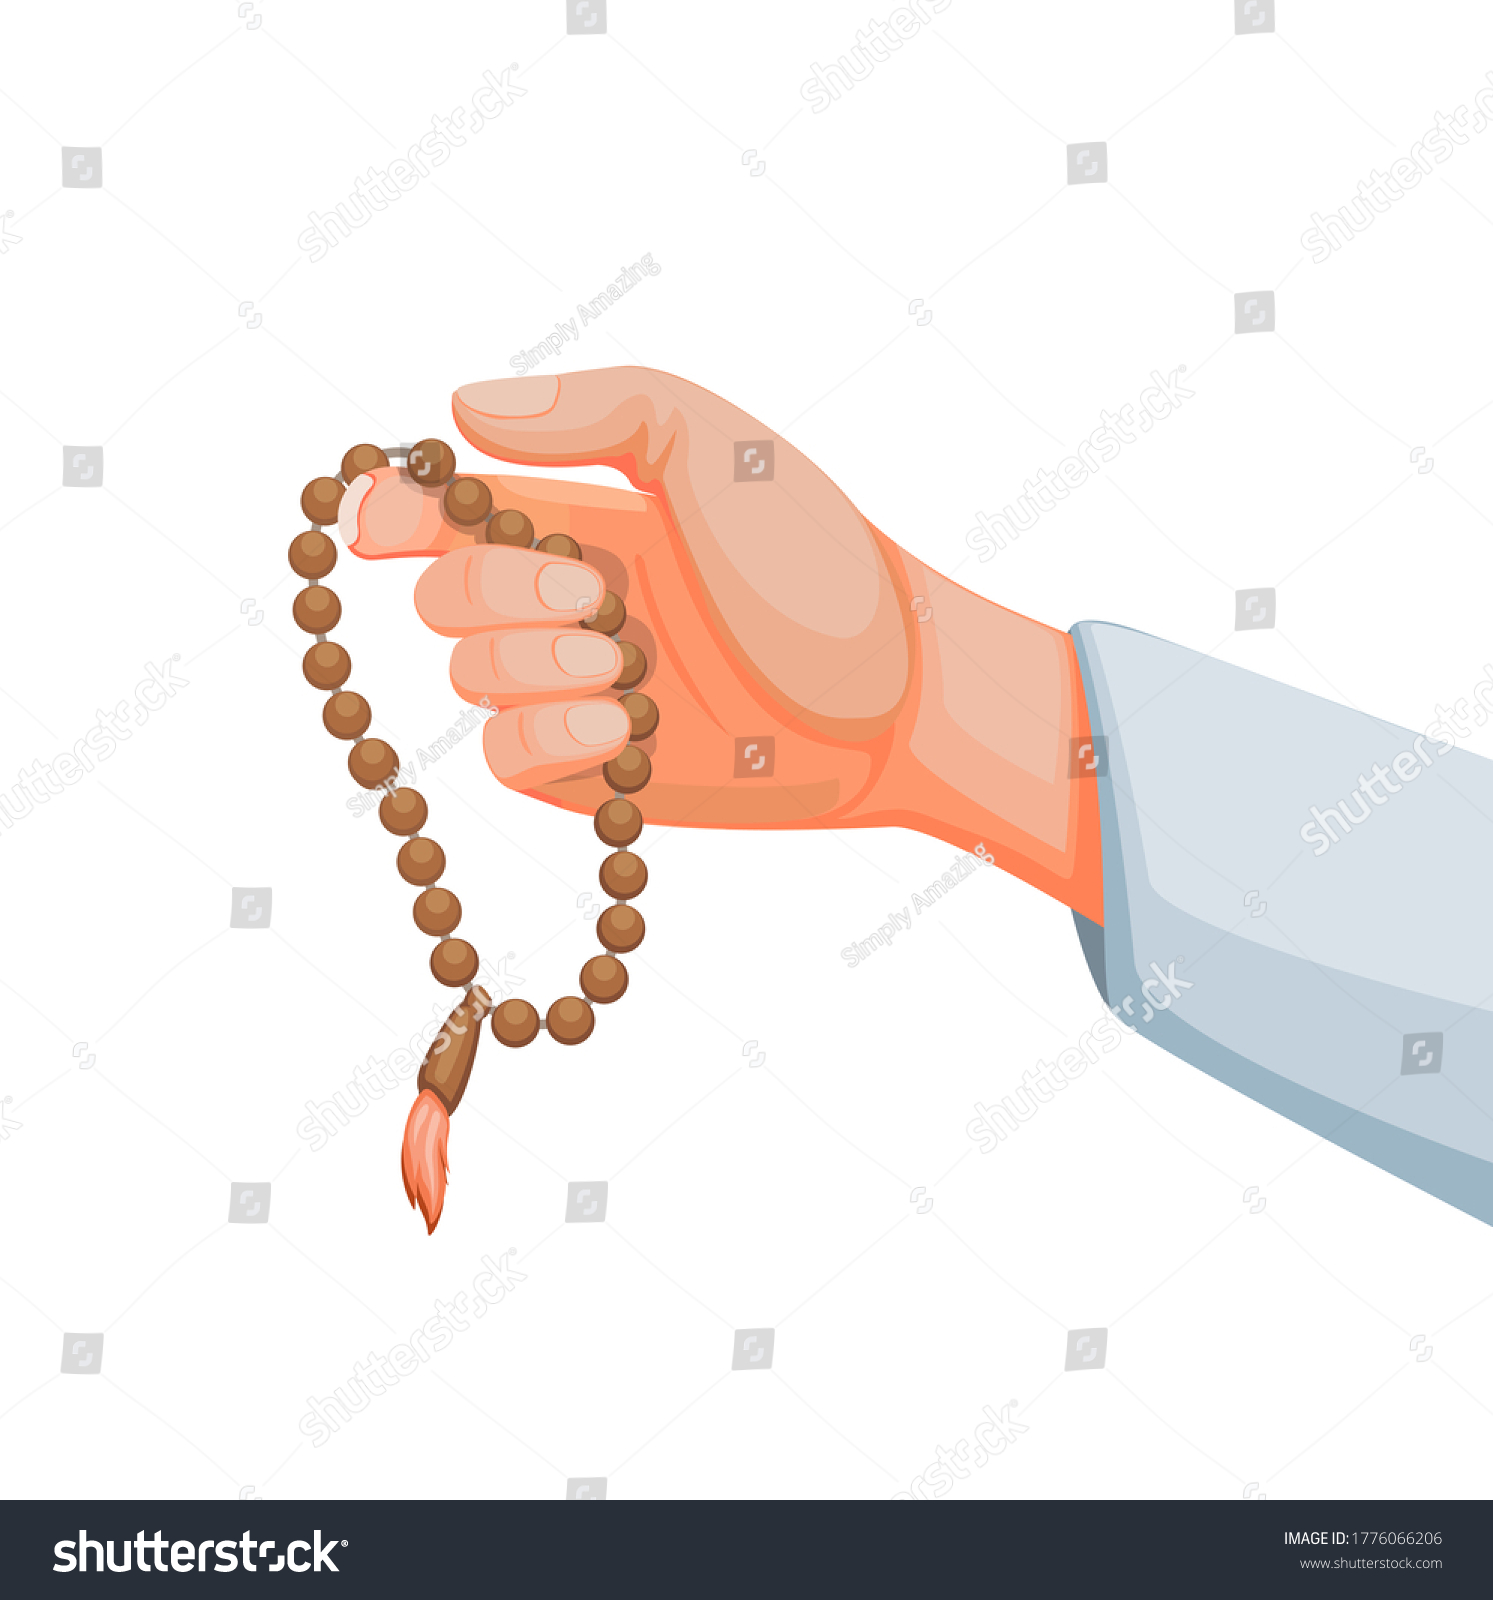 SVG of muslim holding prayer beads aka tasbih counting tool for zikr in islam religion. concept in cartoon illustration vector isolated in white background svg